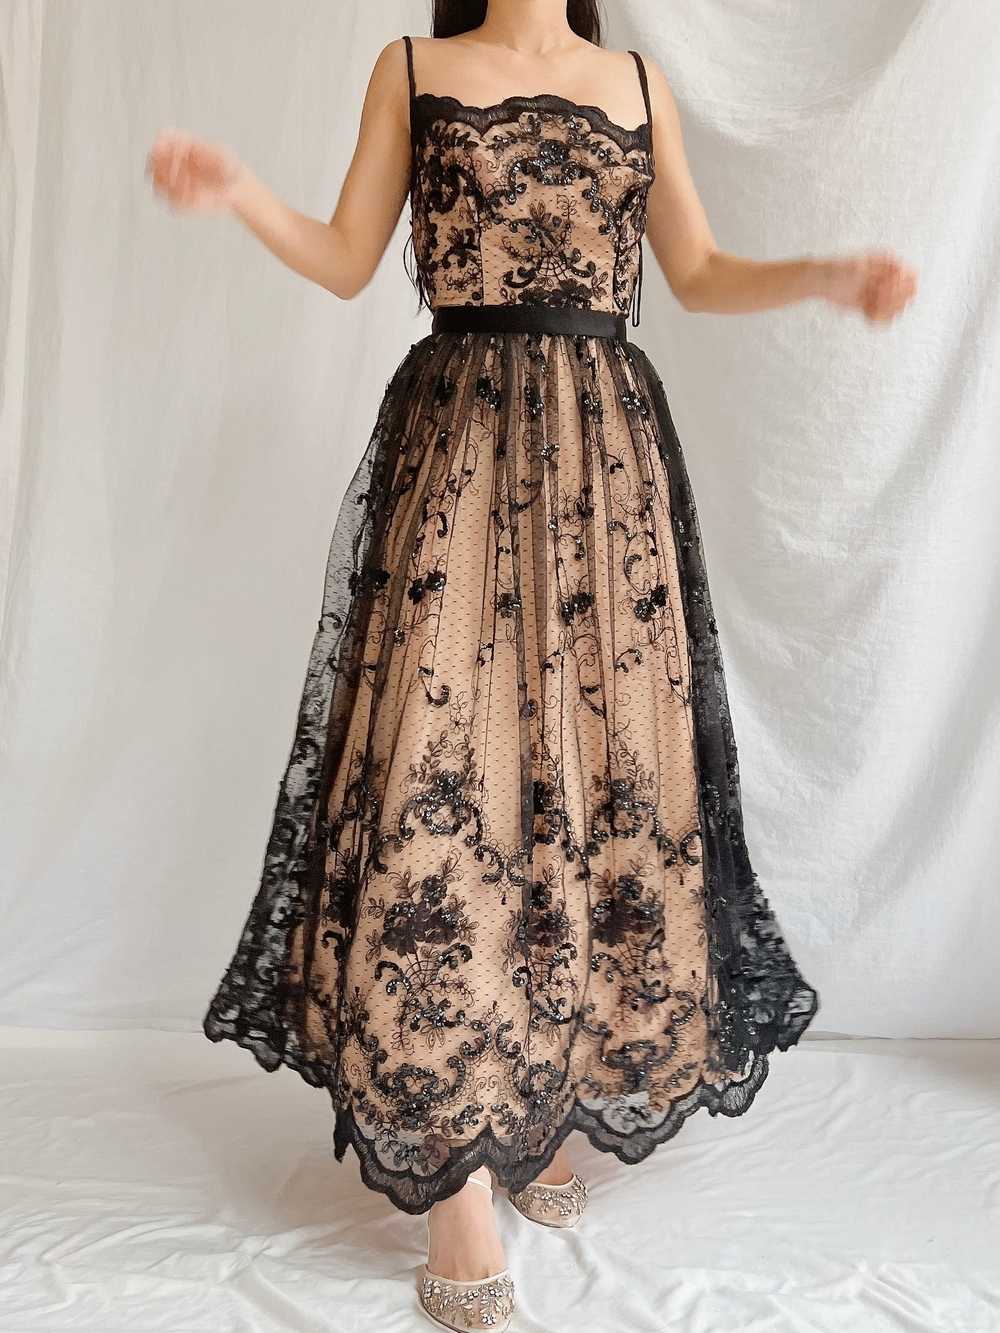 Vintage Nude and Black Lace Dress - S - image 11